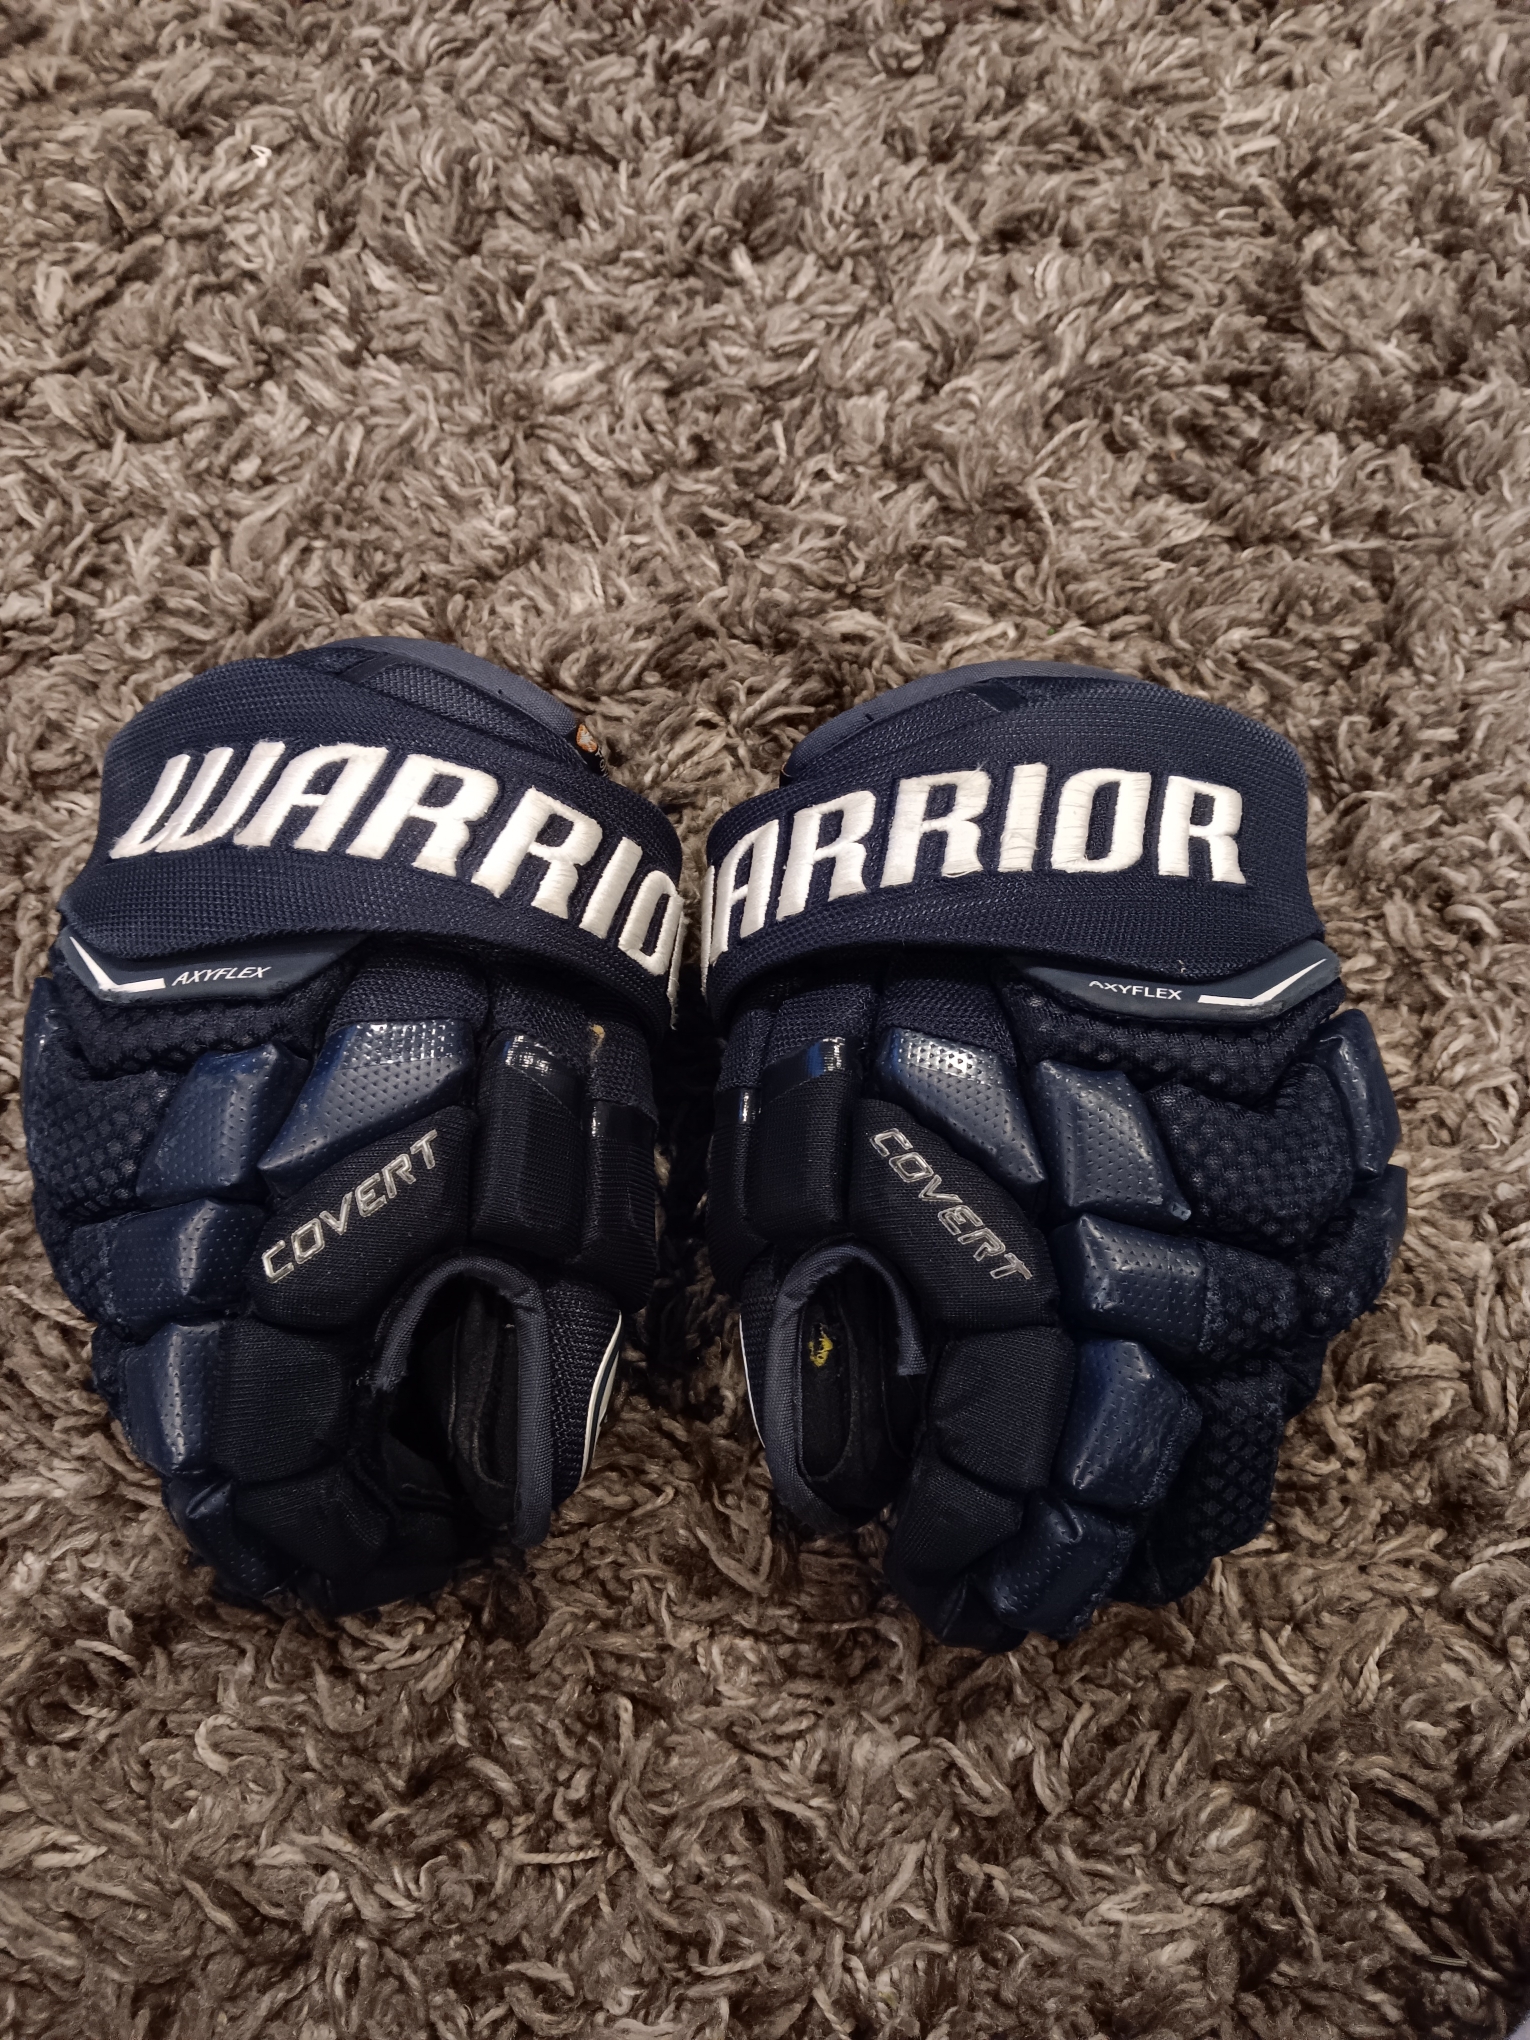 Used Warrior Covert QRL Pro Gloves 11"